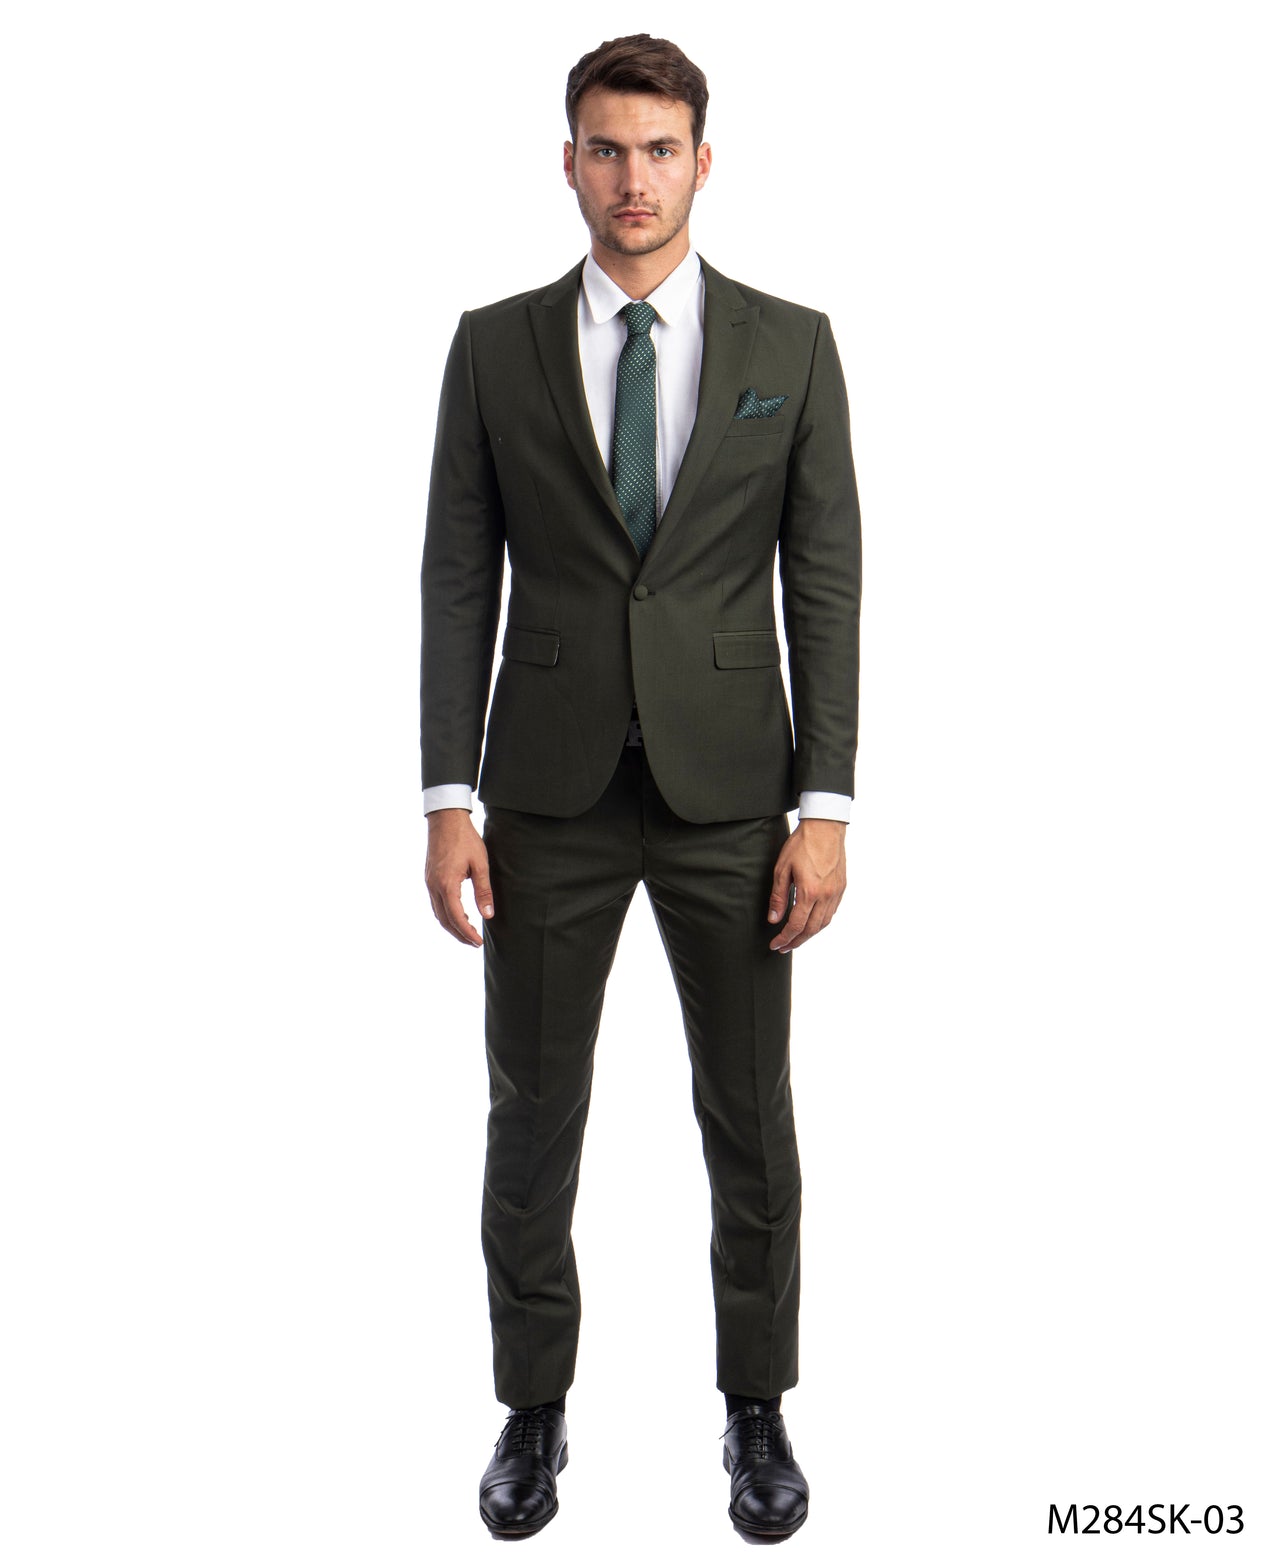 Green Suit For Men Formal Suits For All Ocassions - Hattitude